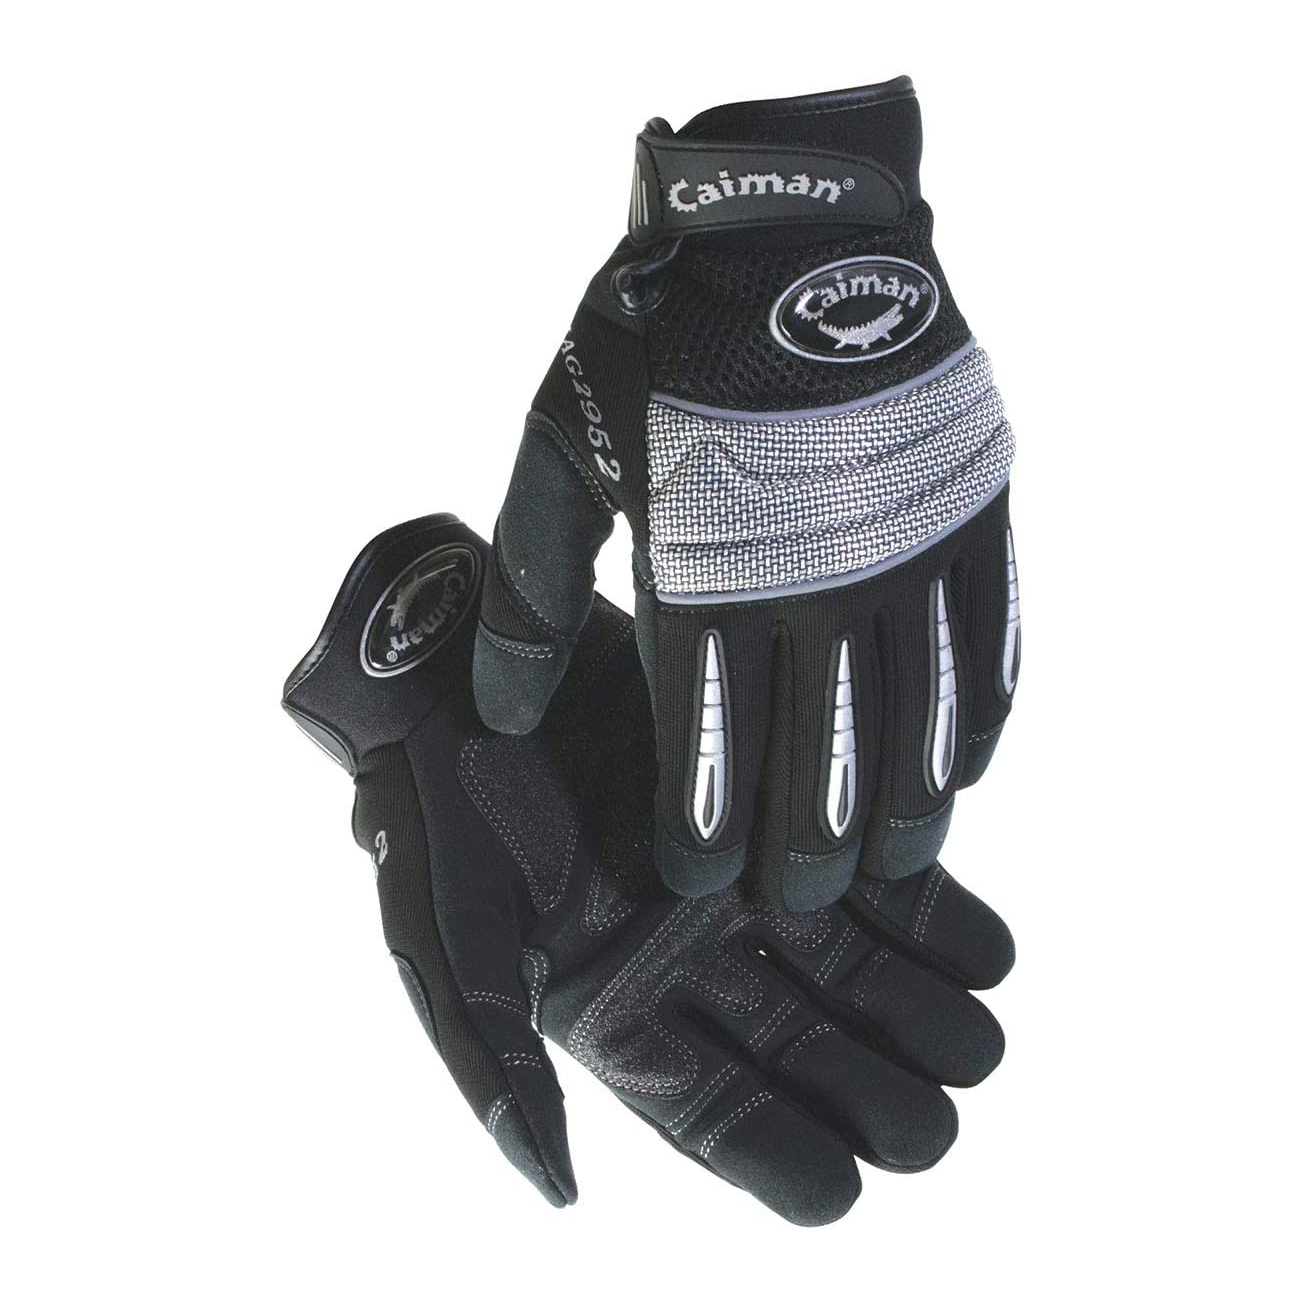 Caiman Synthetic General Work Gloves